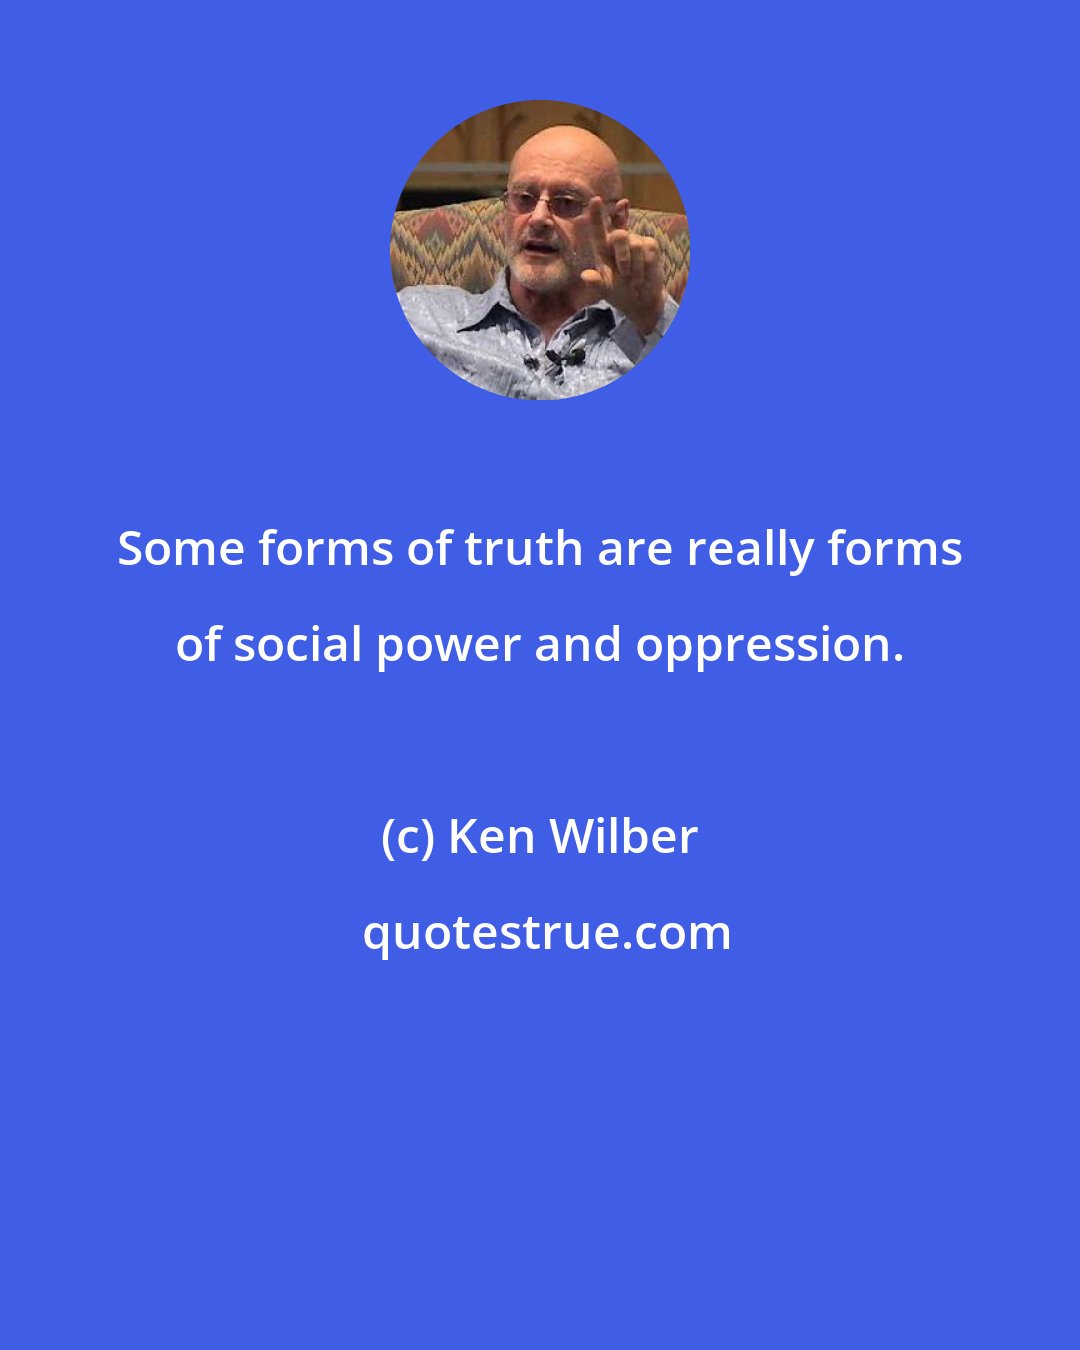 Ken Wilber: Some forms of truth are really forms of social power and oppression.